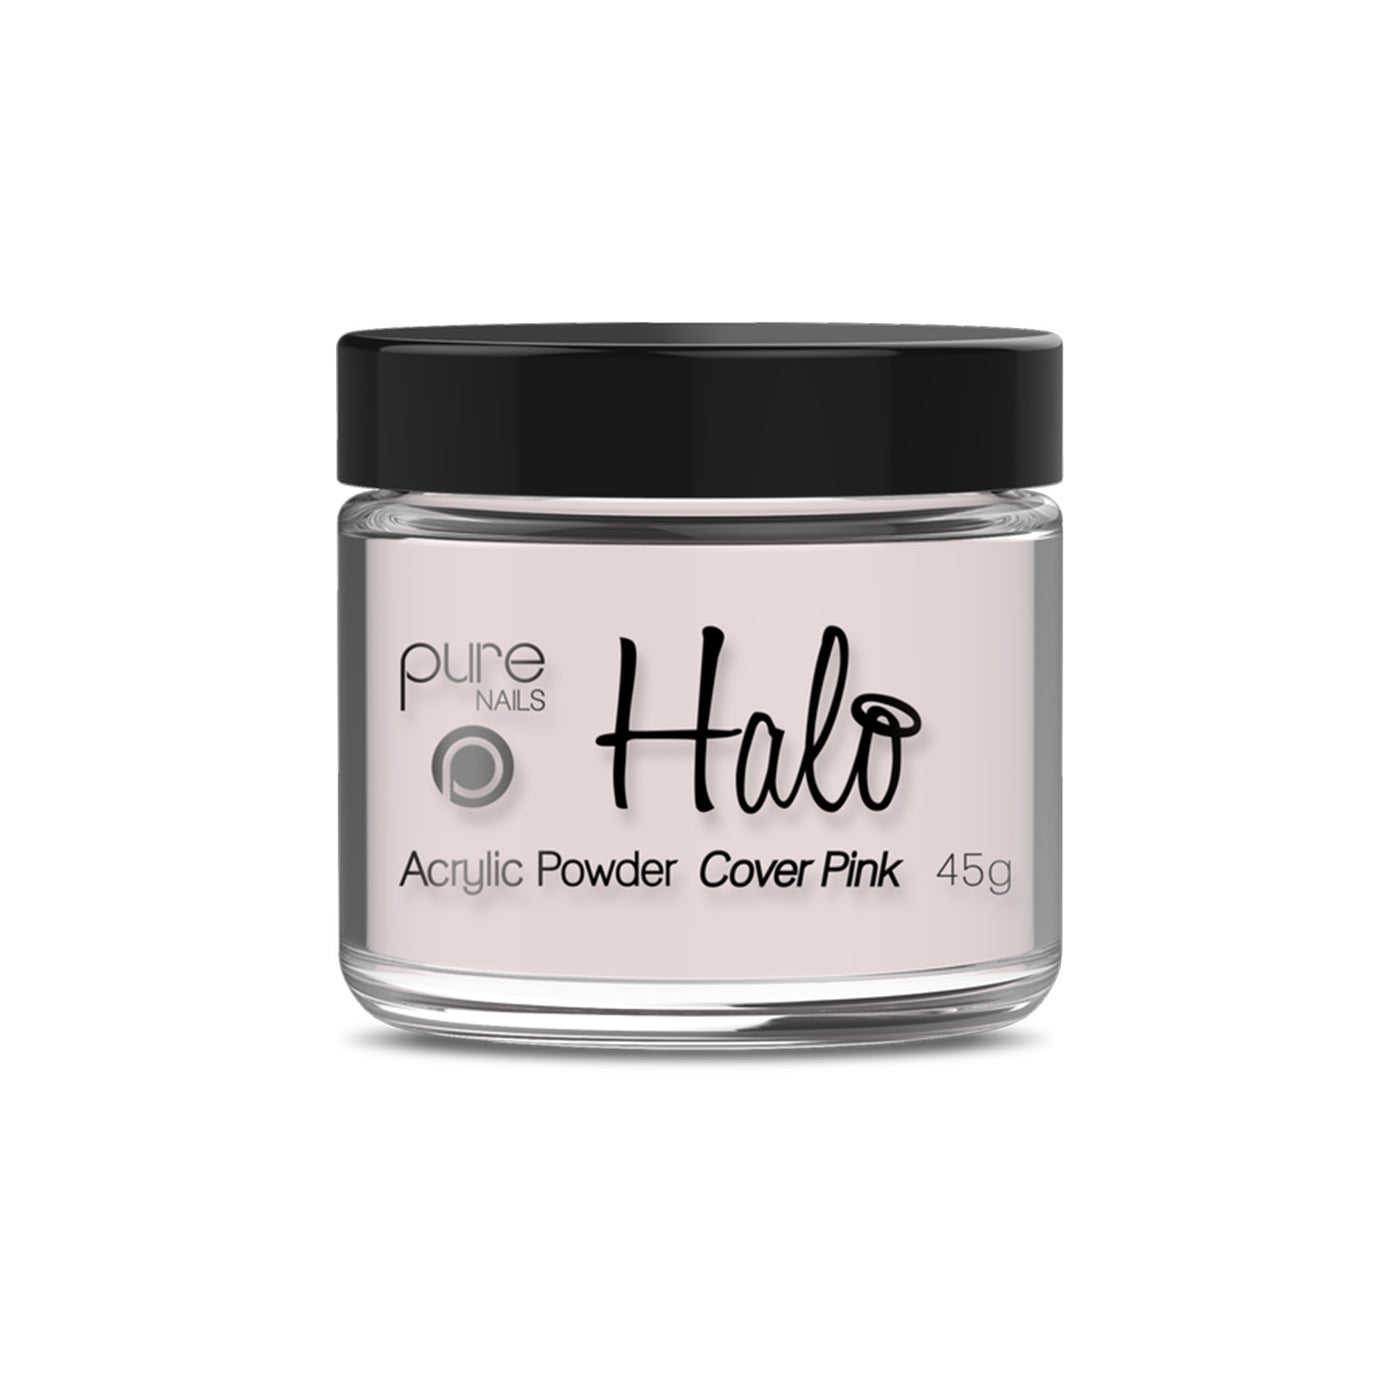 Halo Acrylic Powder - Cover Pink (45g) - Ultimate Hair and Beauty